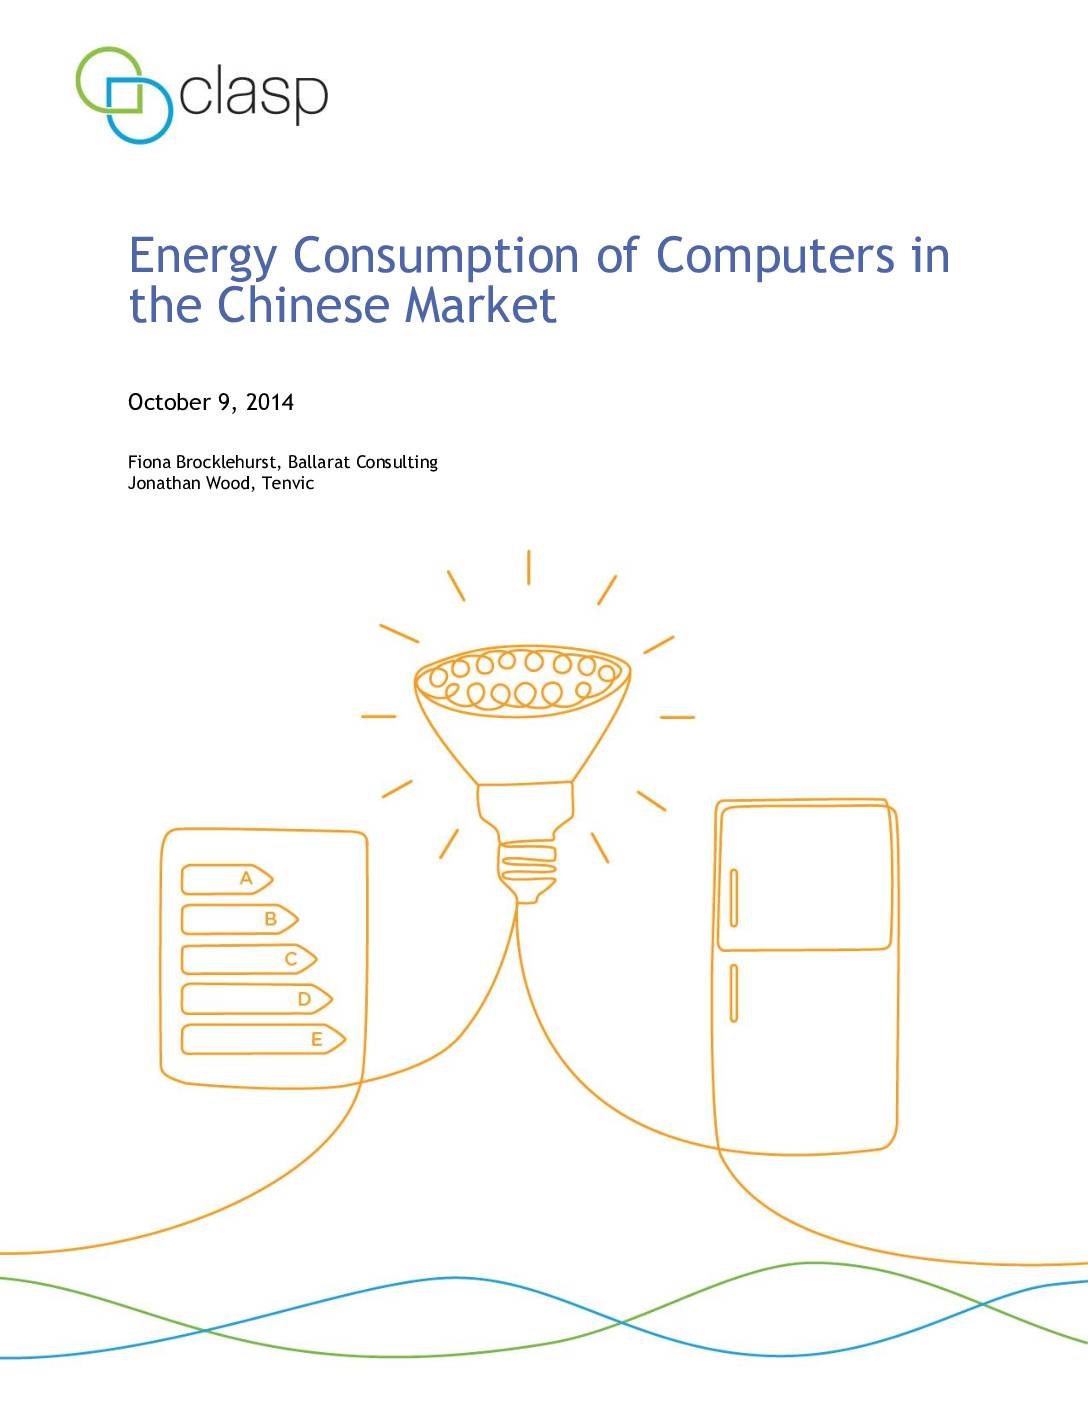 Energy Consumption of Computers in the Chinese Market